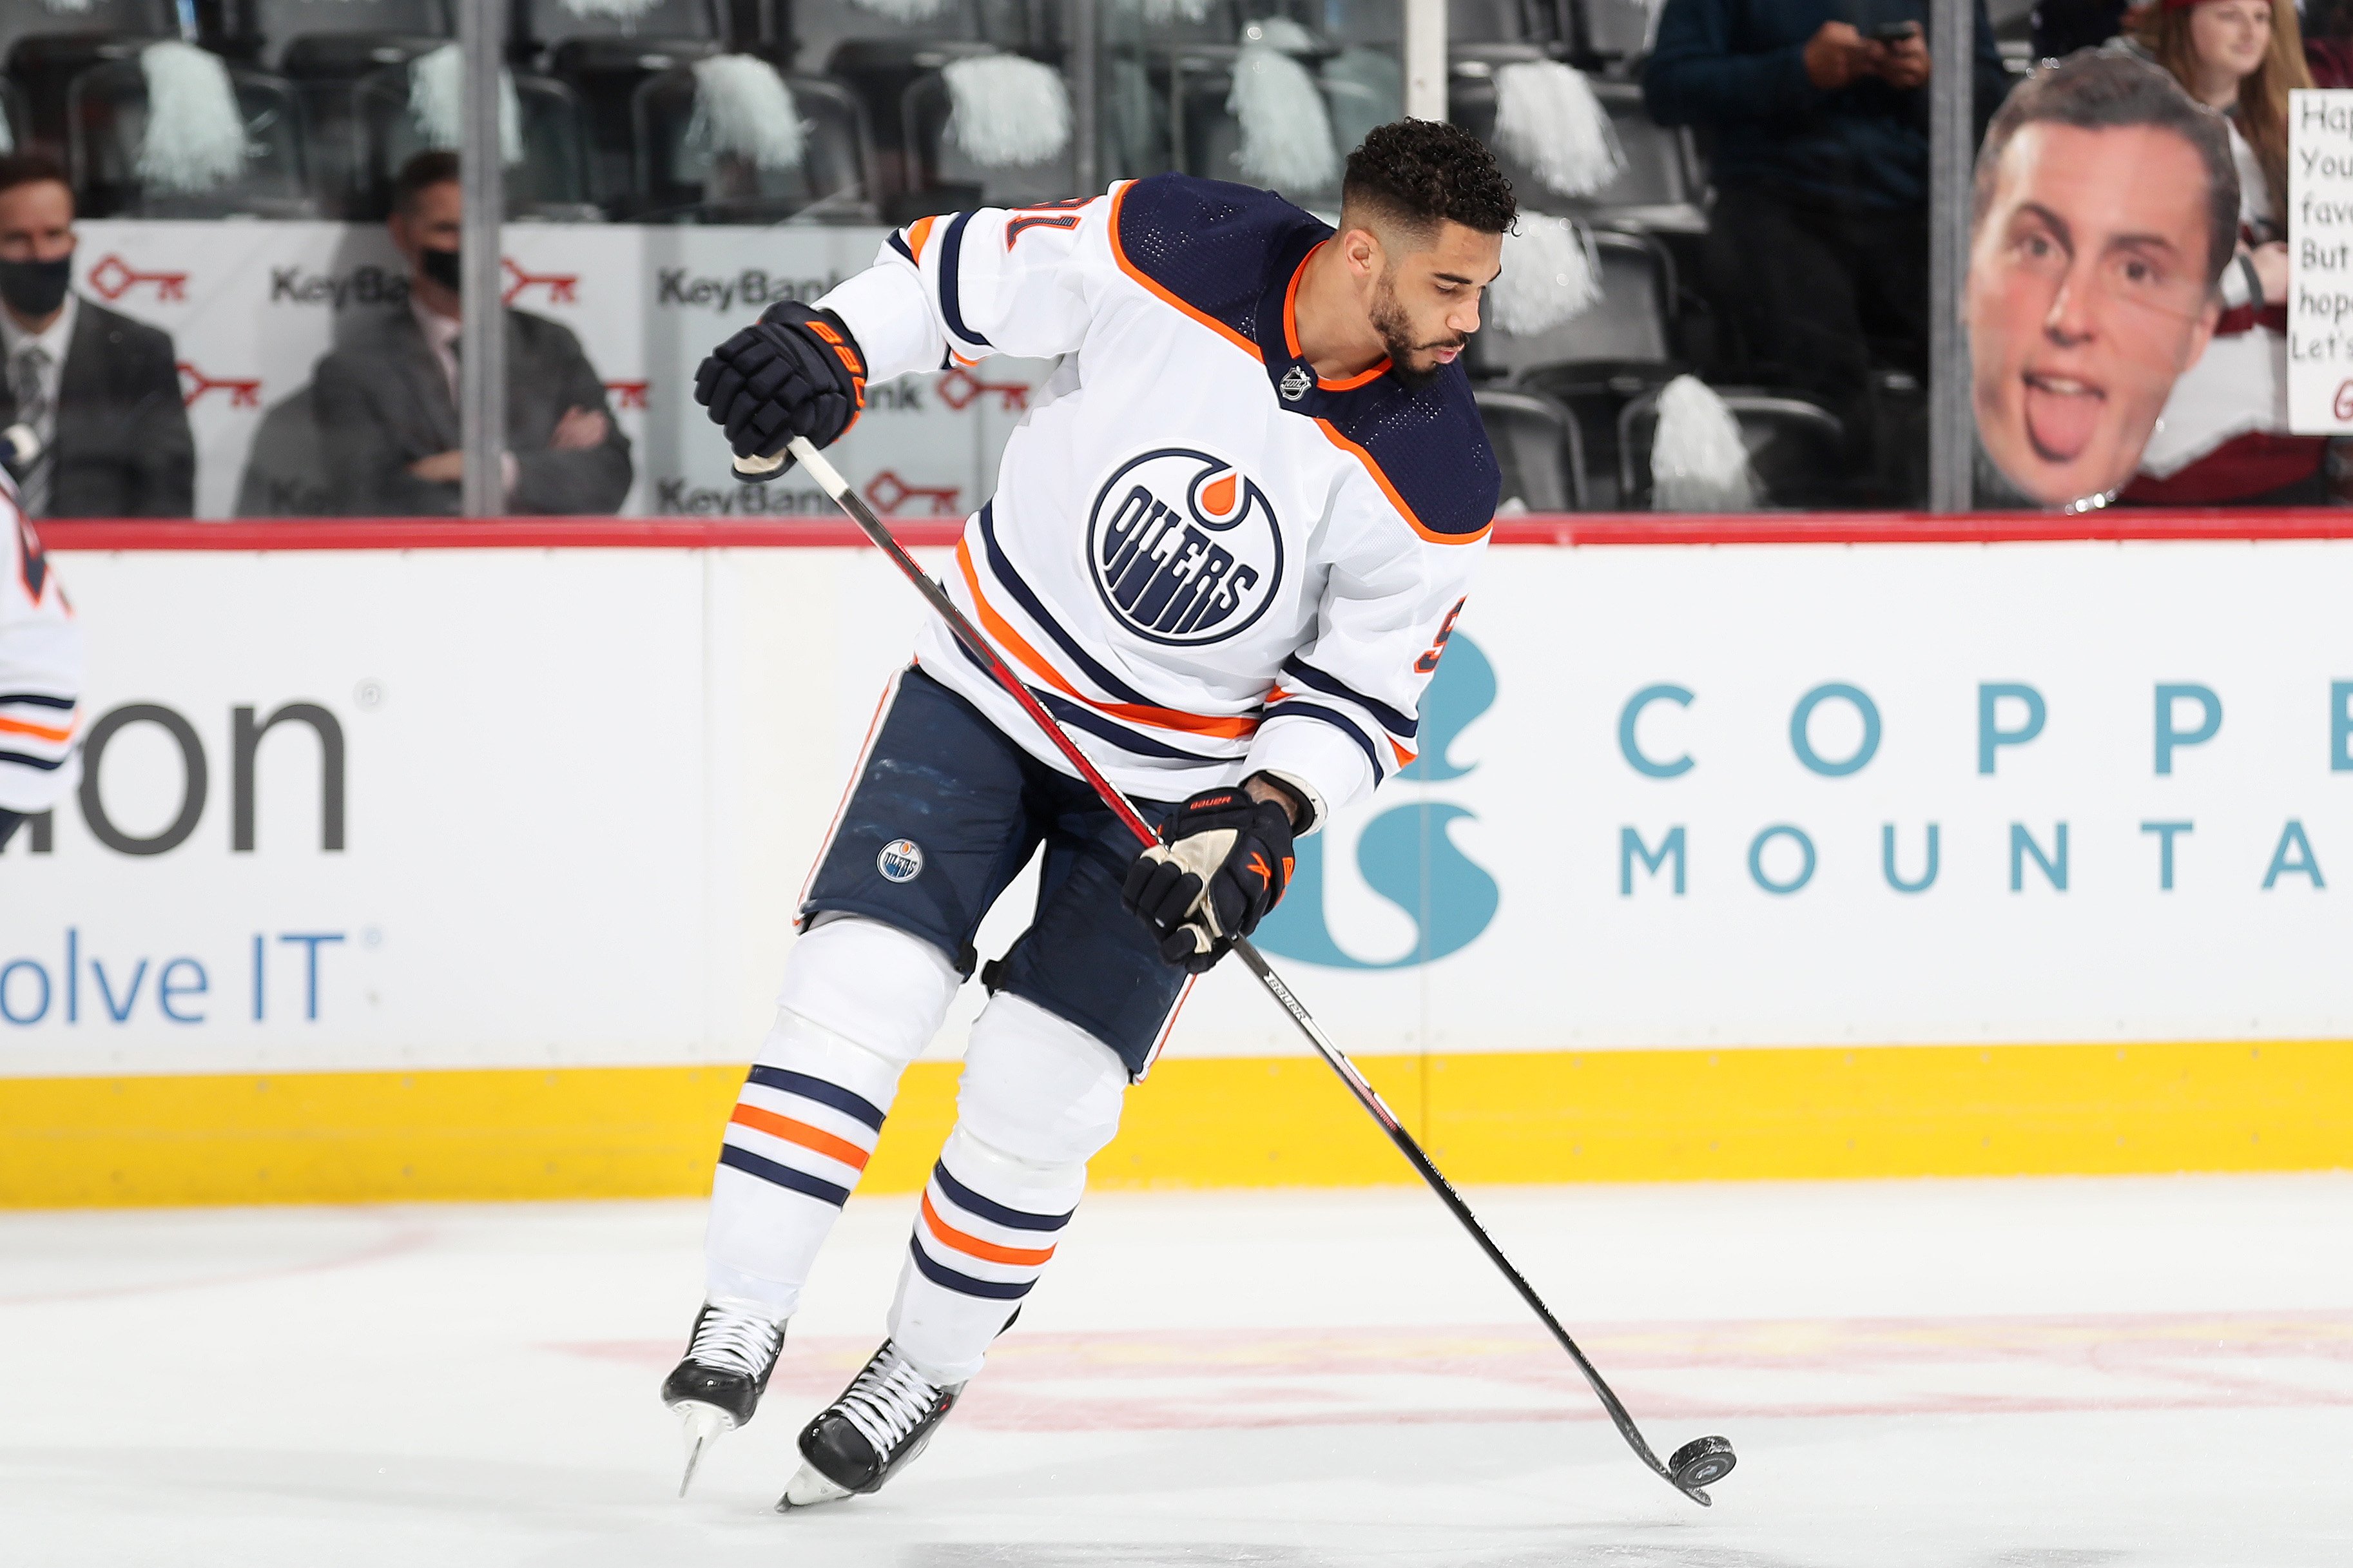 Evander Kane playing for the Edmonton Oilers skates against the the Colorado Avalanche at Ball Arena | Source: GettyImages